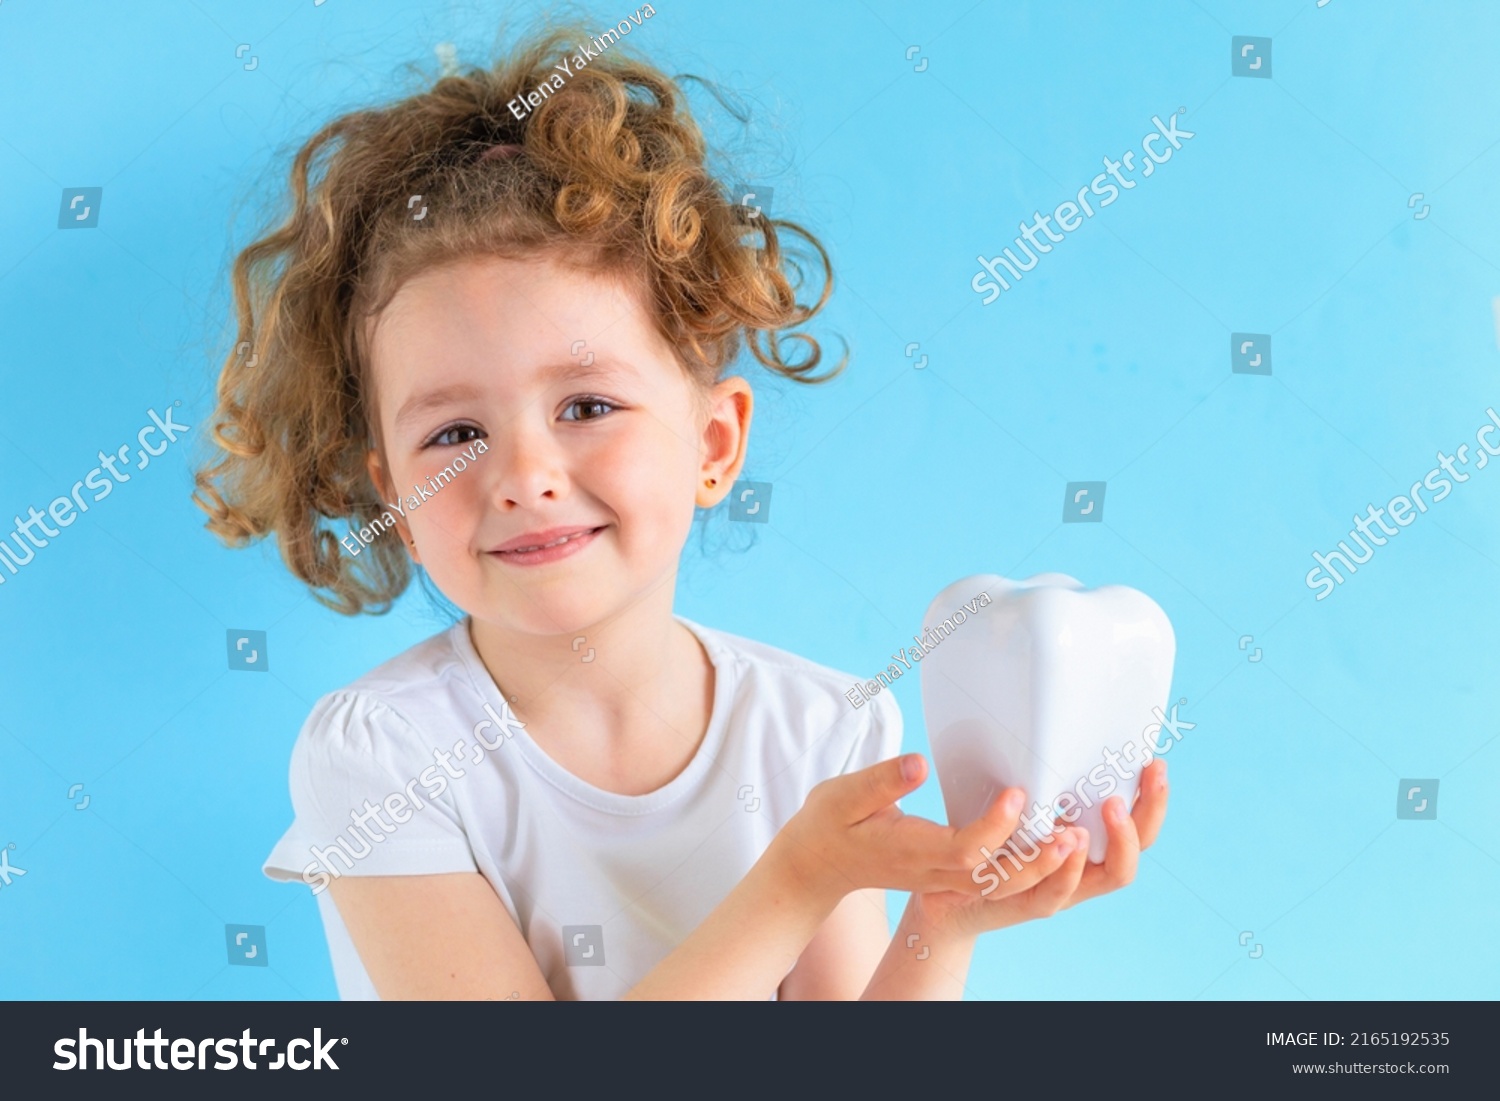 Little cute smiling girl holding tooth dent in hand. Kid training oral hygiene. creative medical dentistry . Child learning brushing, cleaning teeth. Prevention of caries in children. dental care kids #2165192535